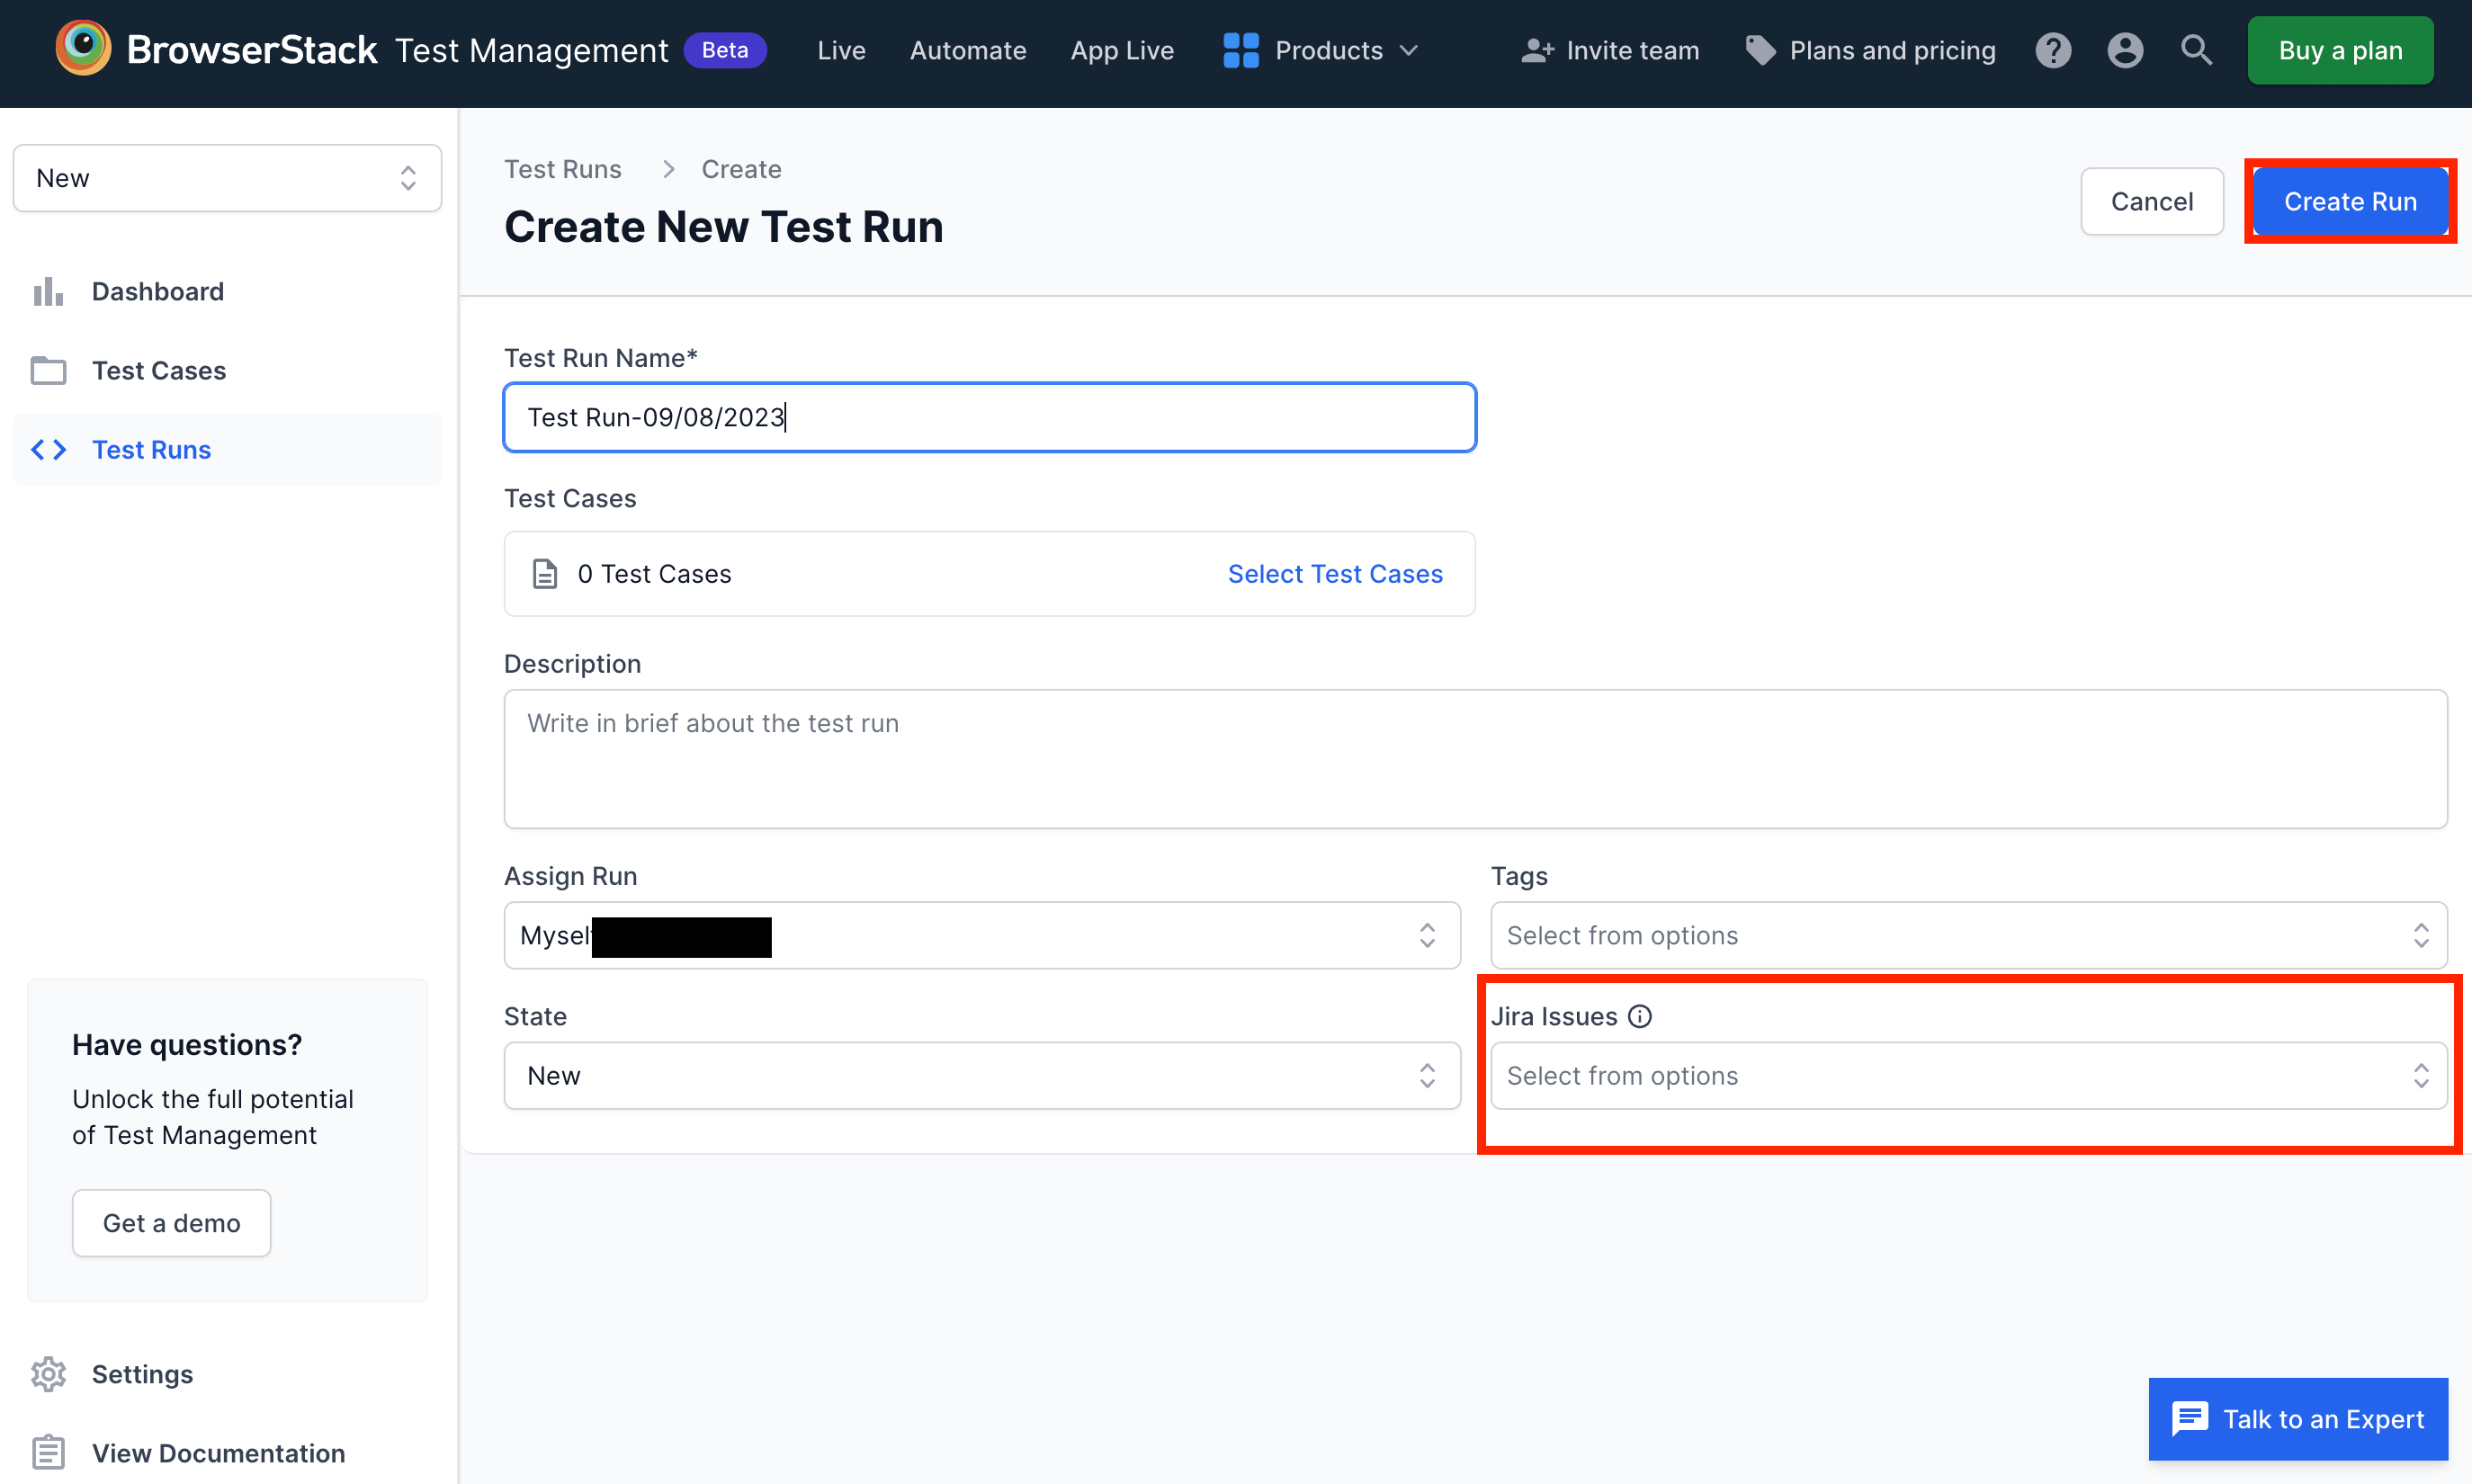 Jira connection to test run